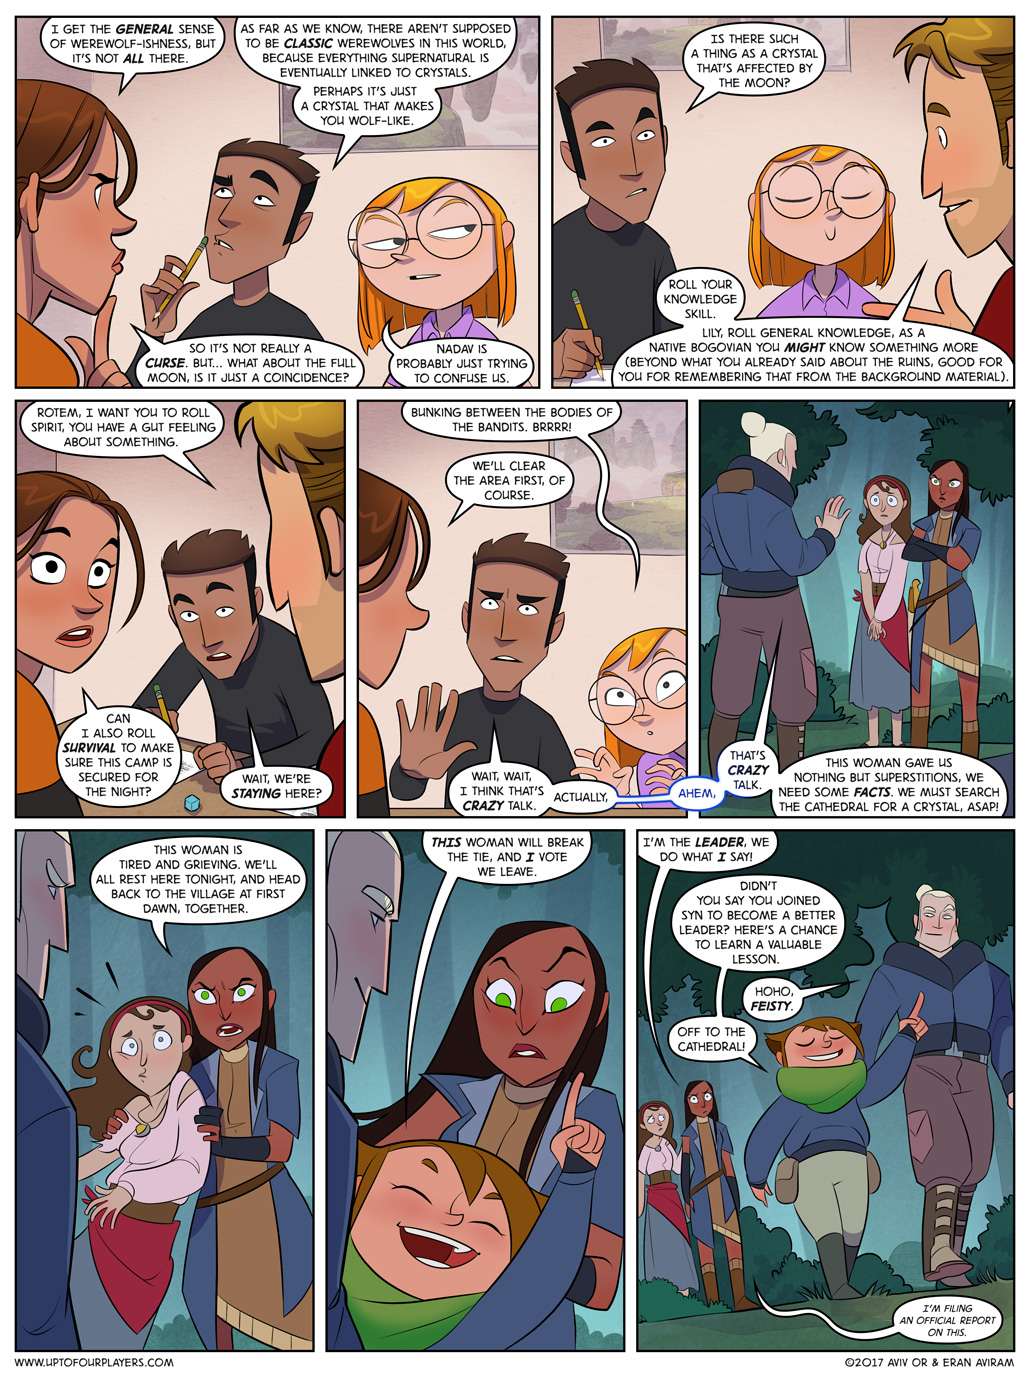 Wild at Heart – Page 14